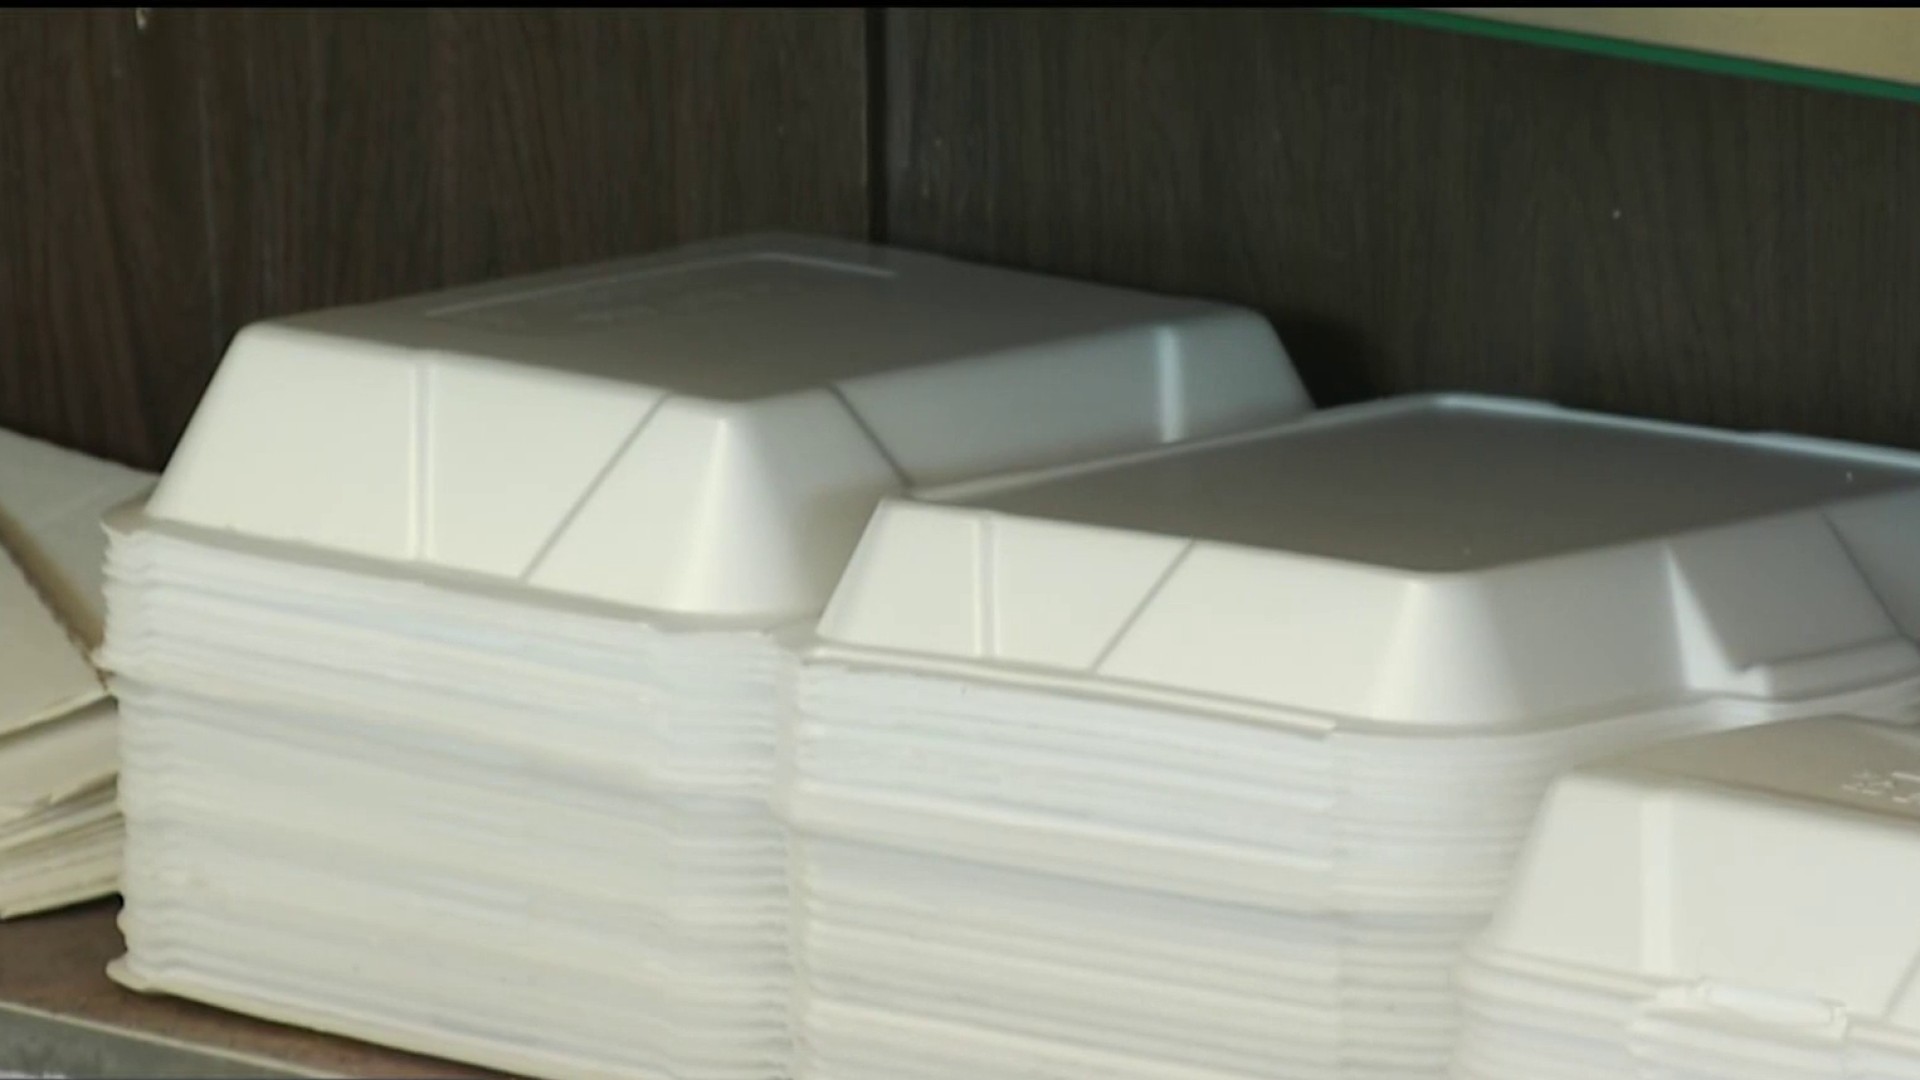 Styrofoam is Officially Banned in the City of San Diego – NBC 7